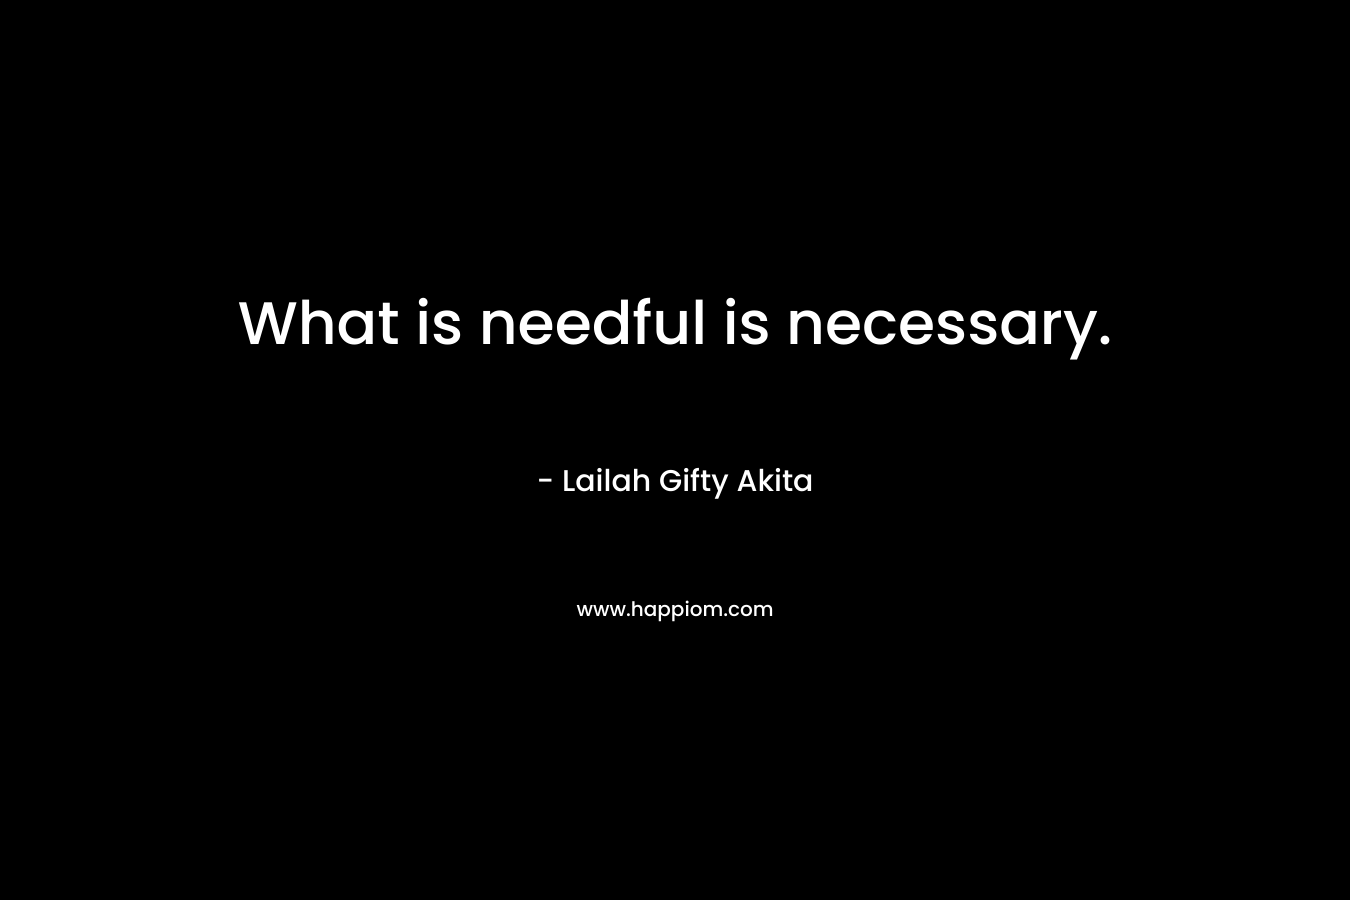 What is needful is necessary.